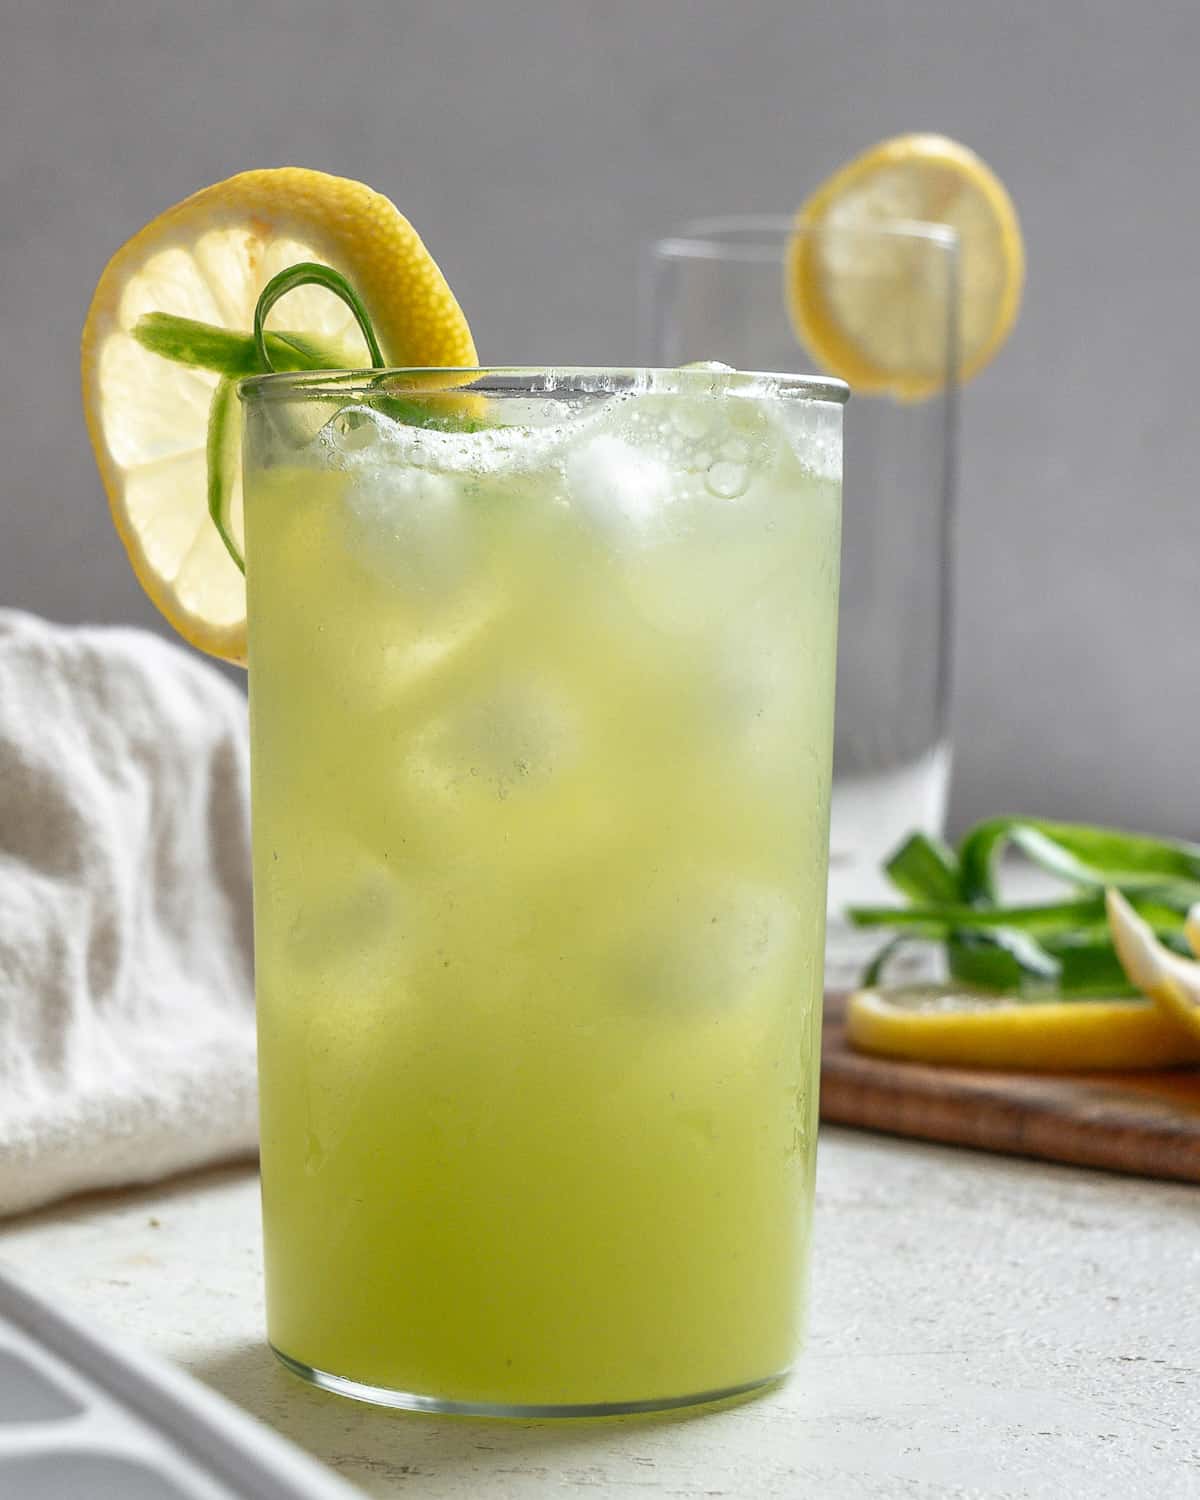 completed Cucumber Lemonade in a glass